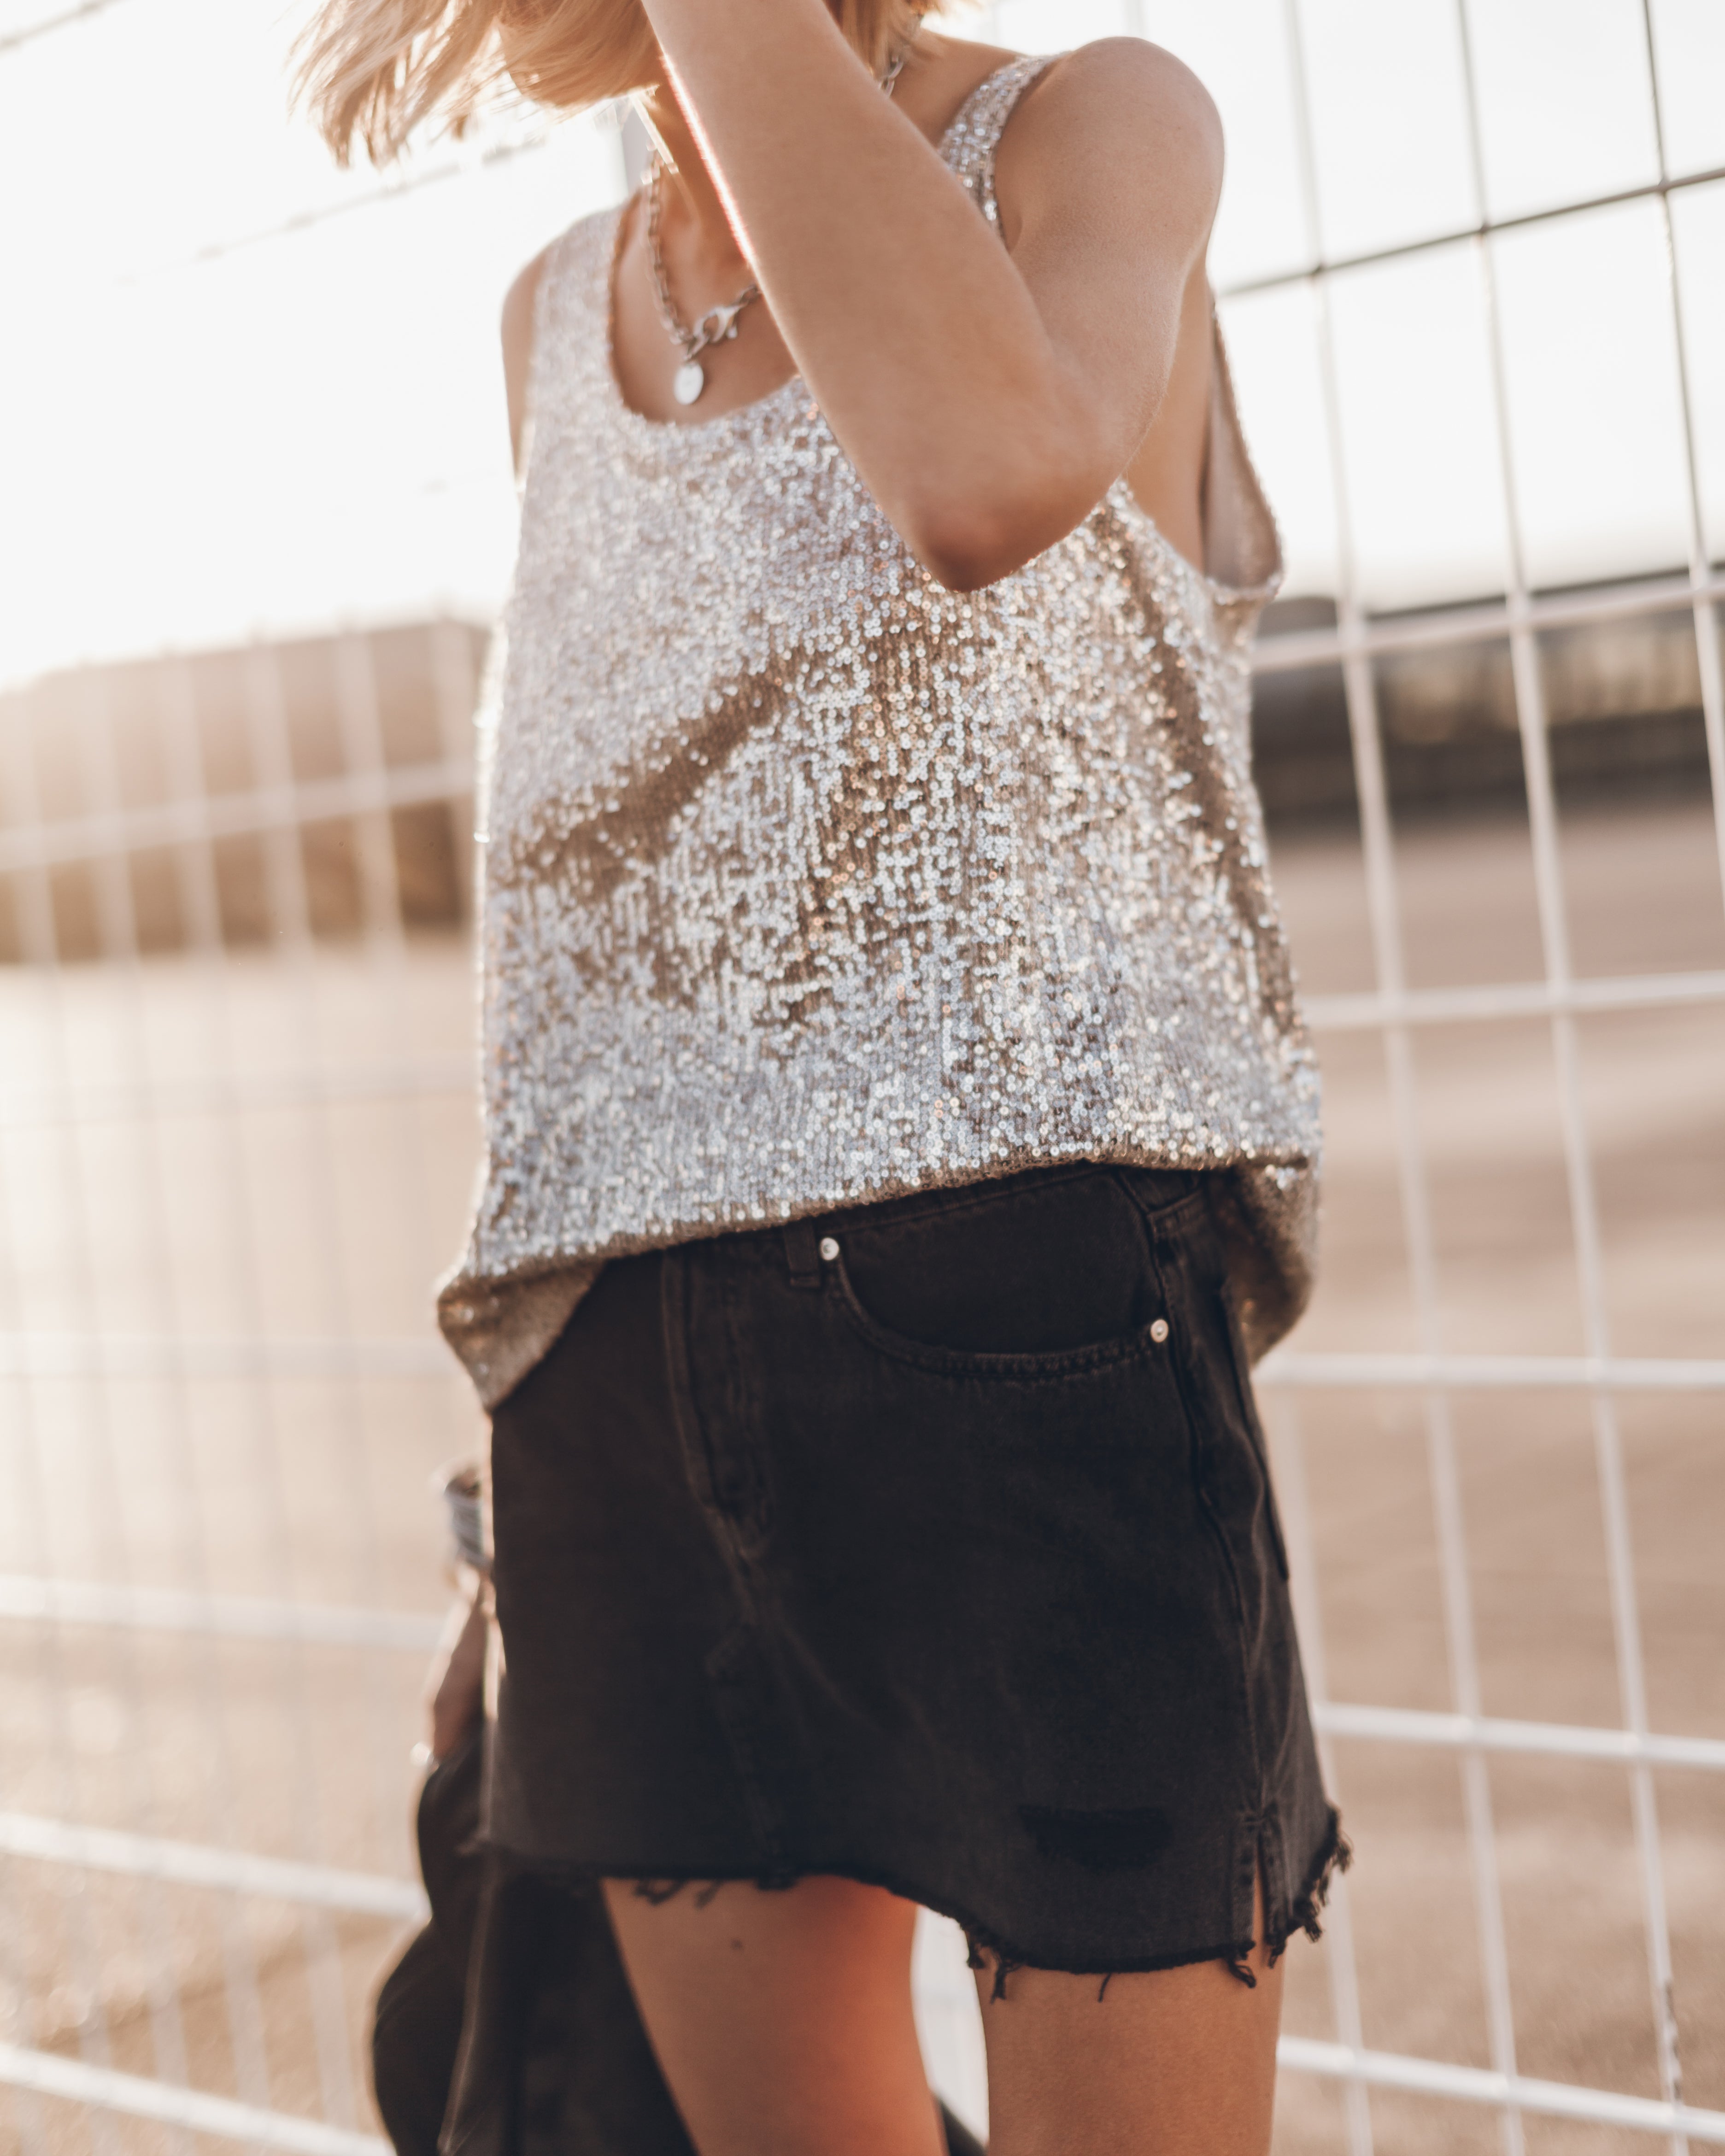 The Light Sequin Base Tank Top